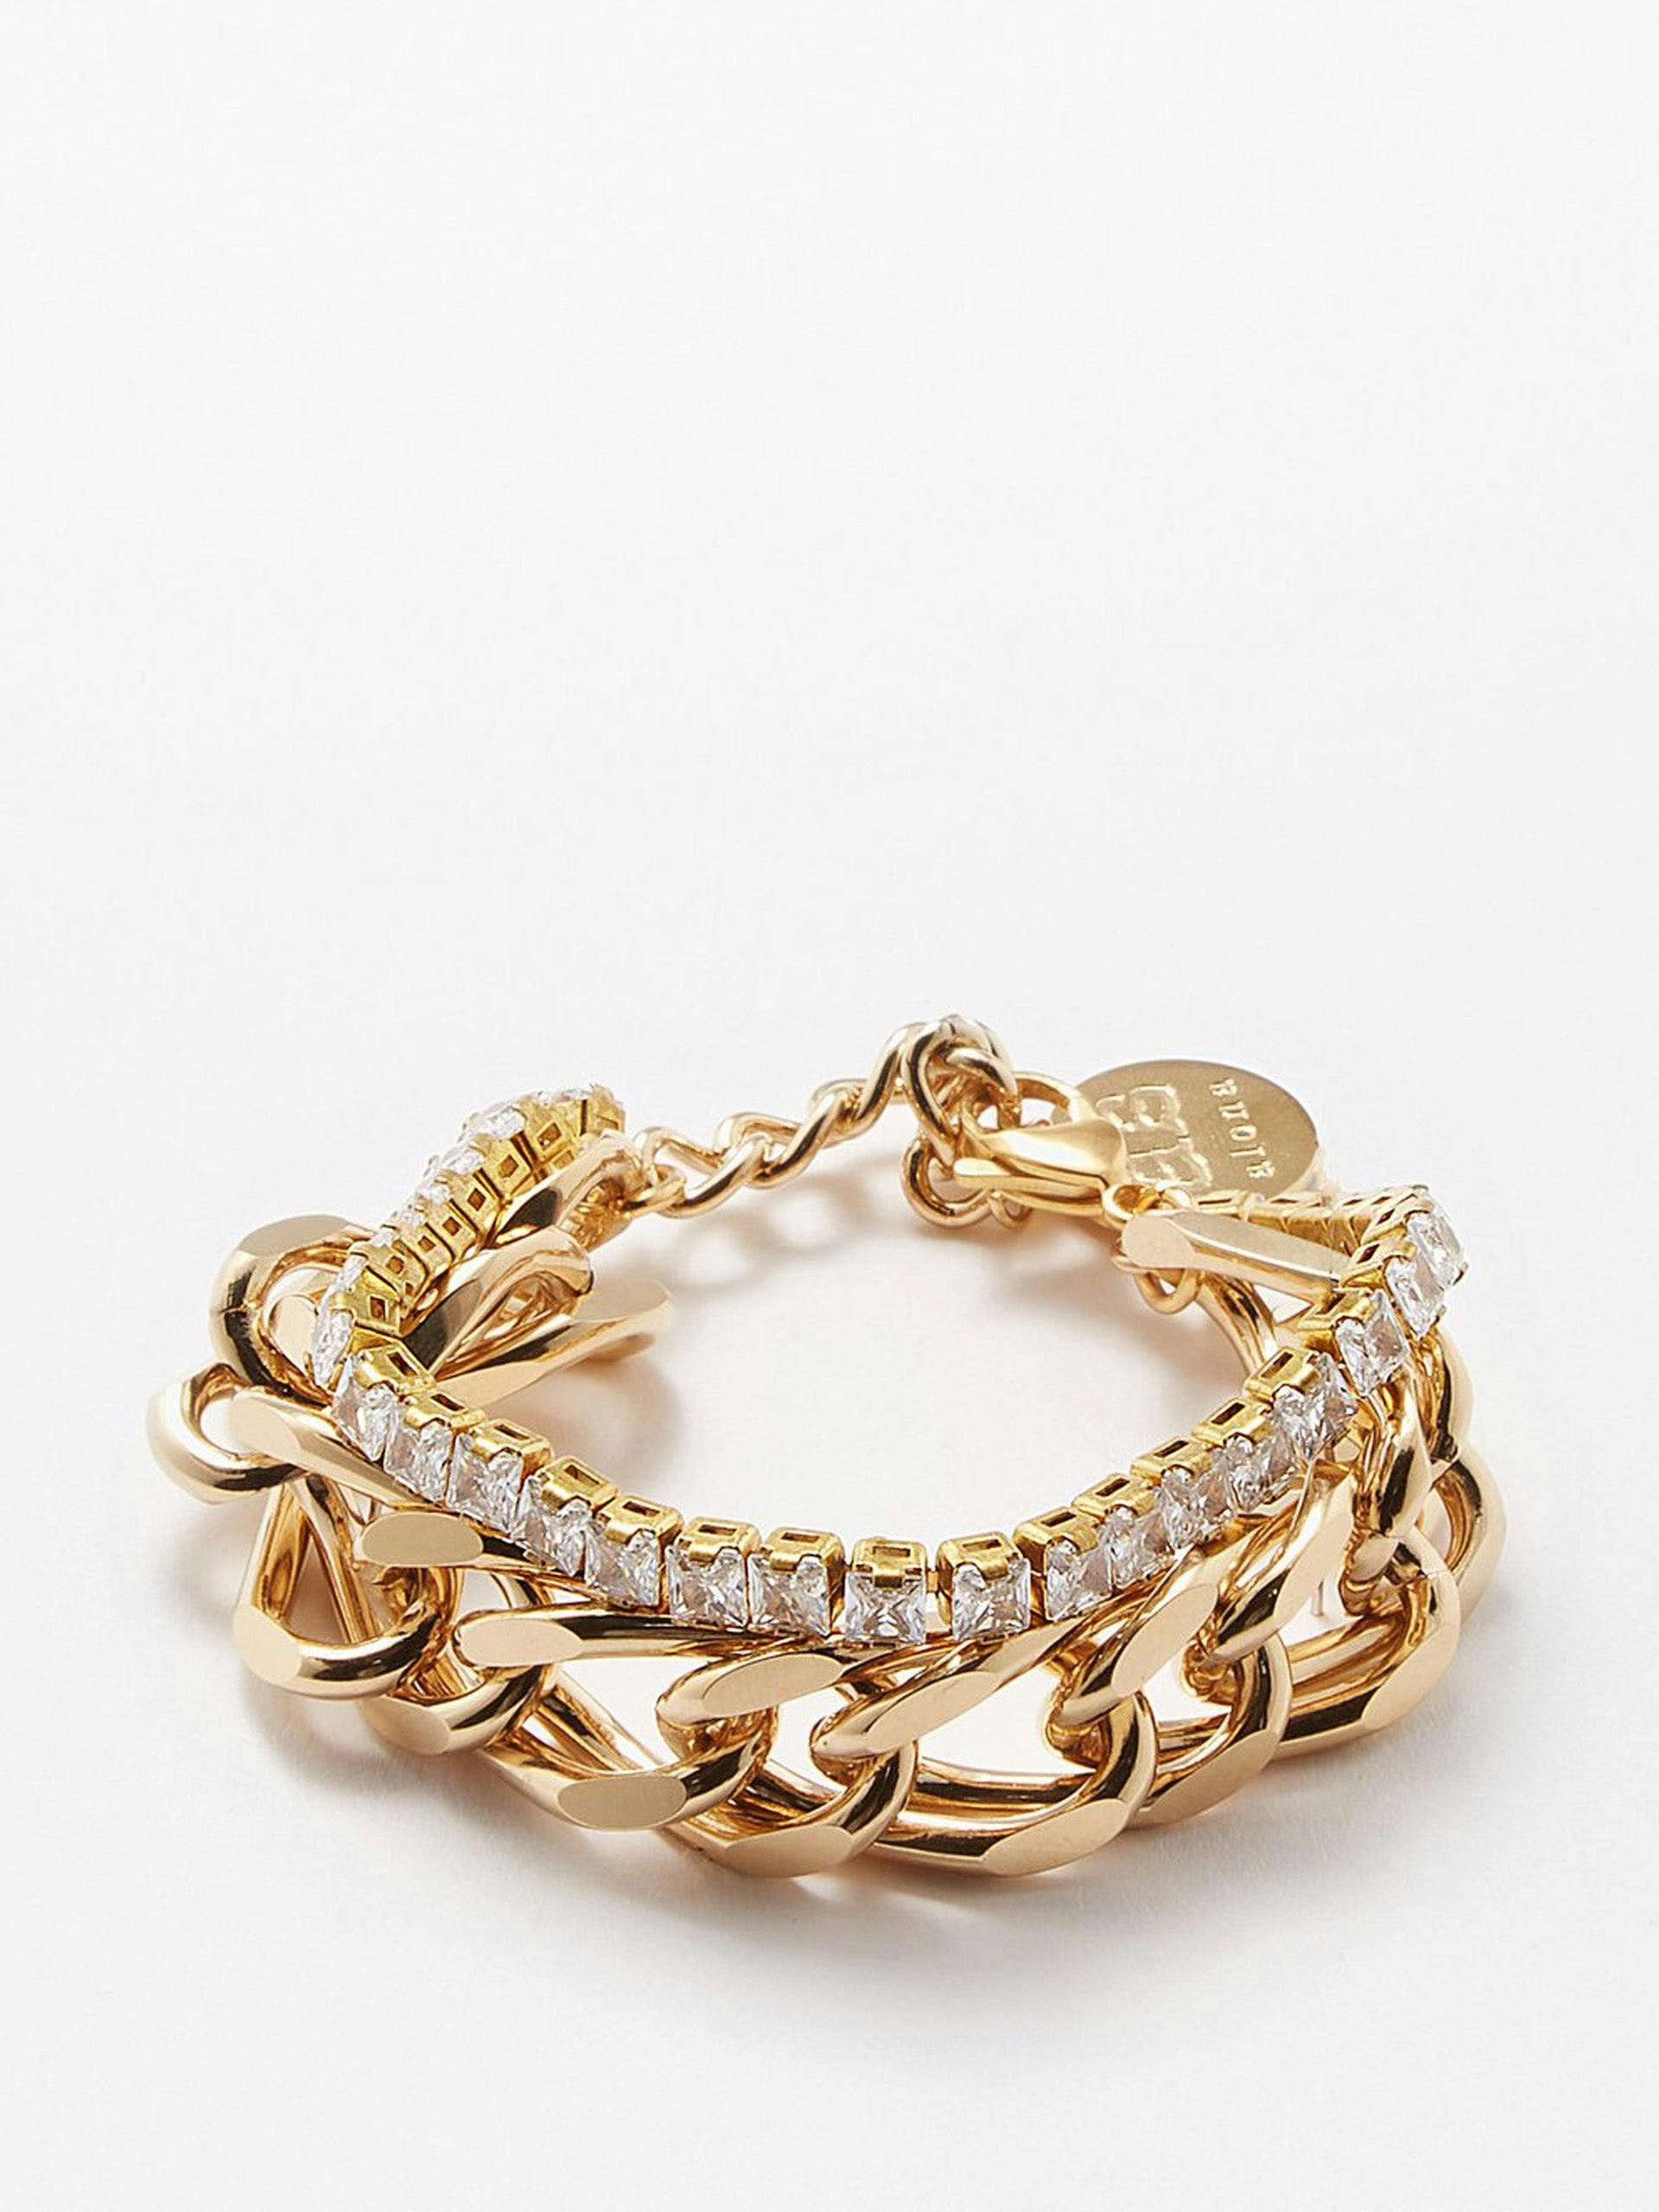 Rhinestone and 18kt gold-plated bracelet